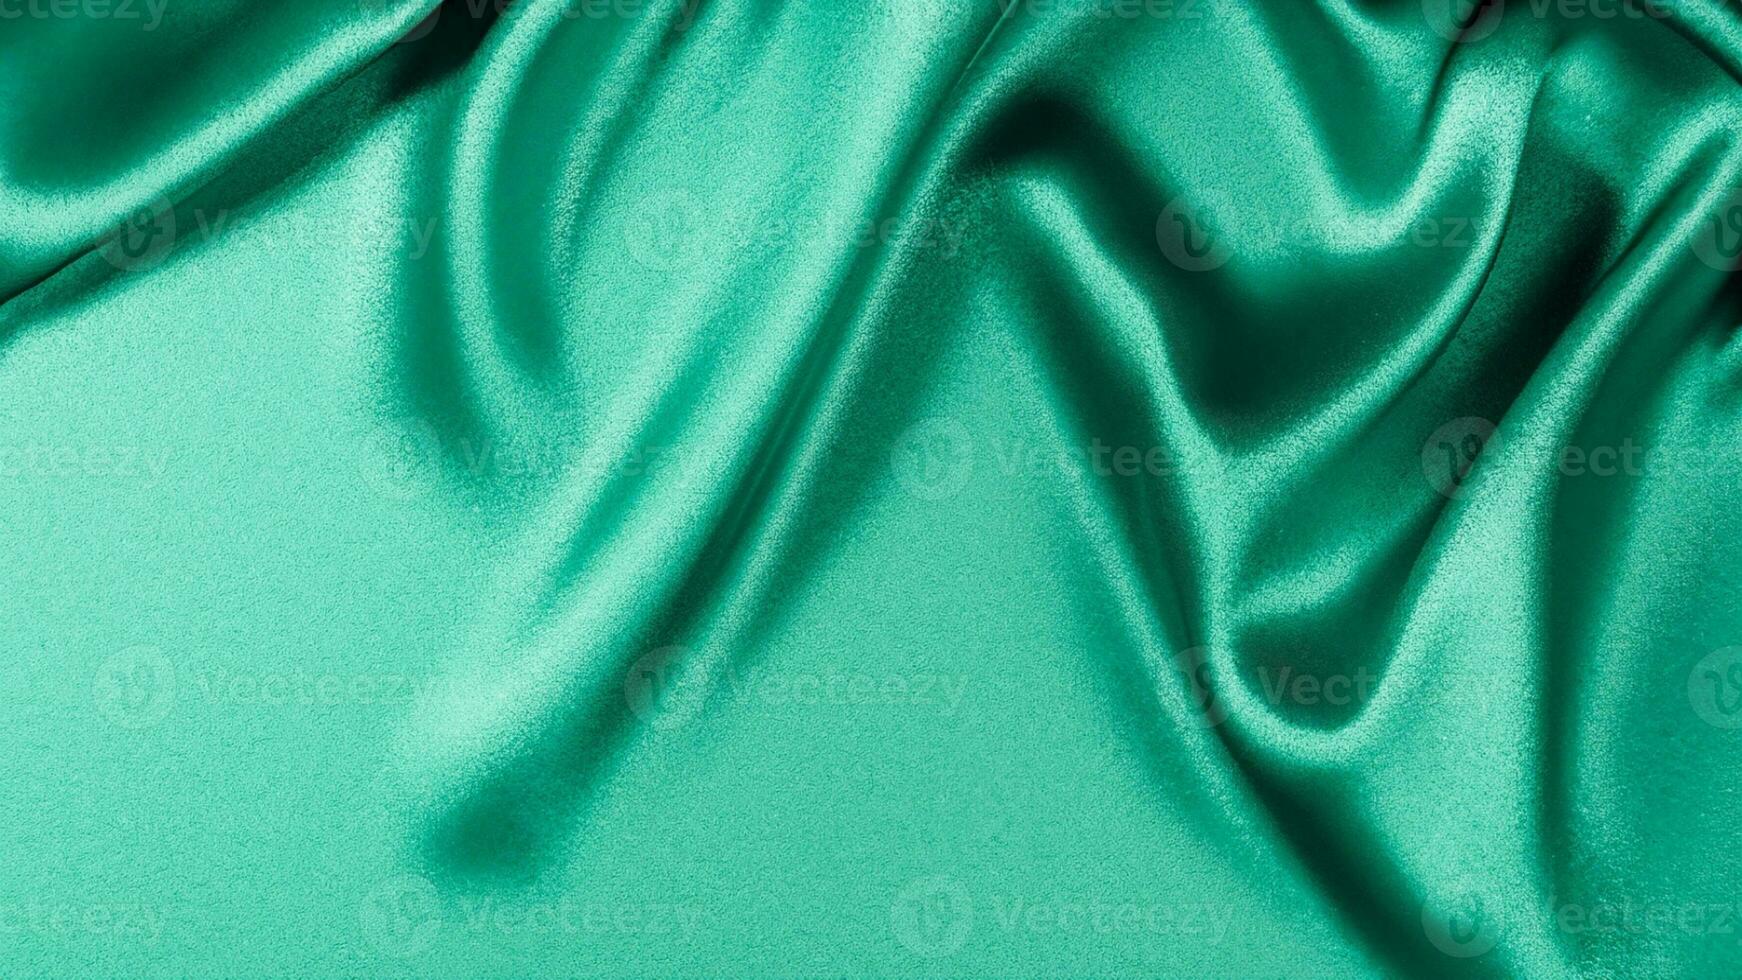 Soft folds of blue silk cloth texture., Stock image